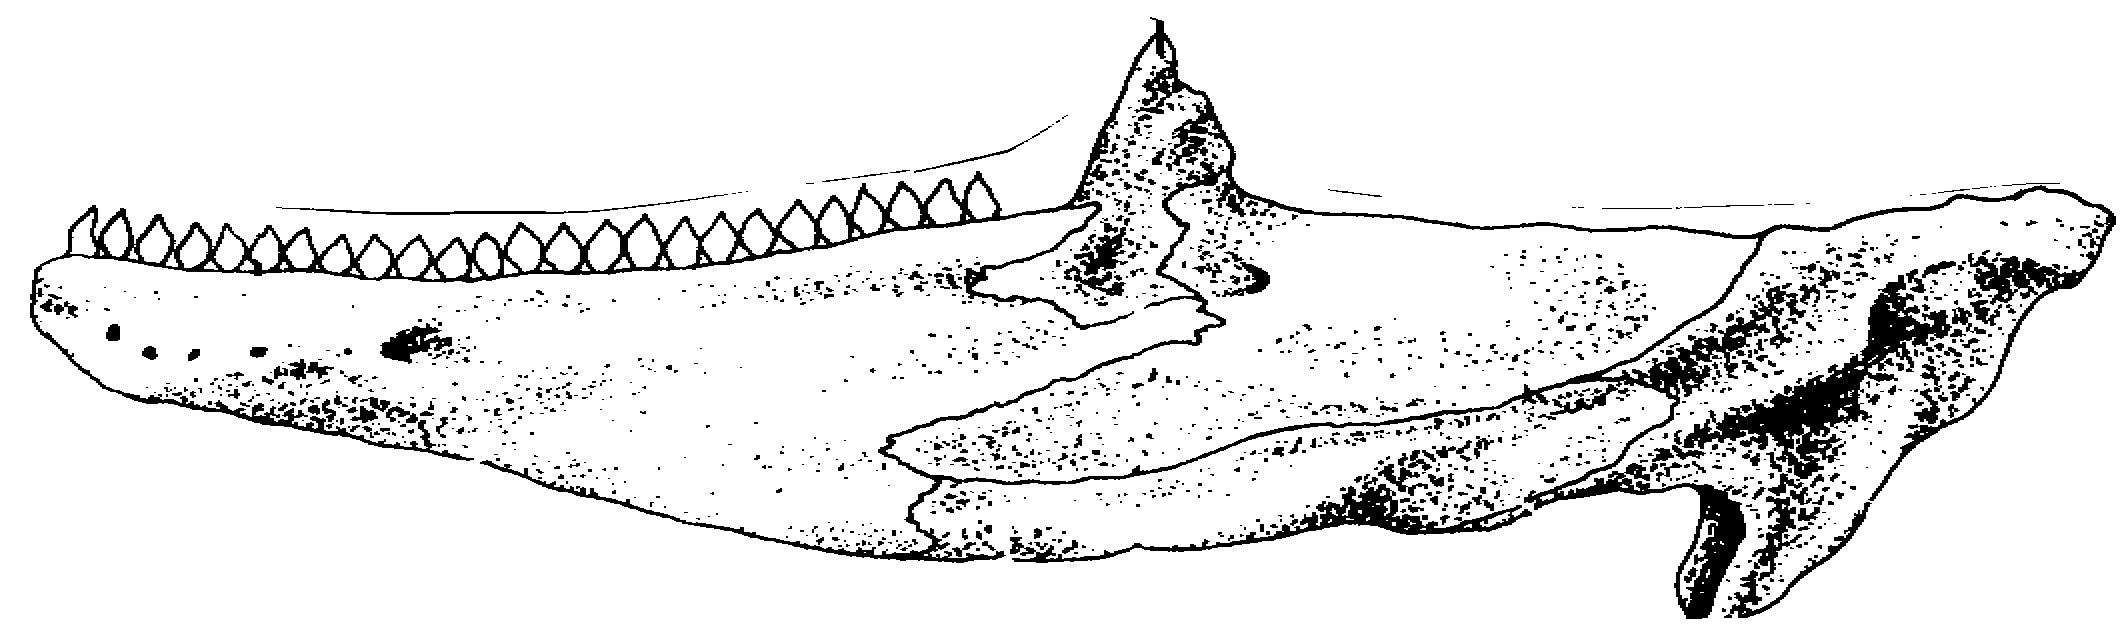 tooth of an iguana drawing